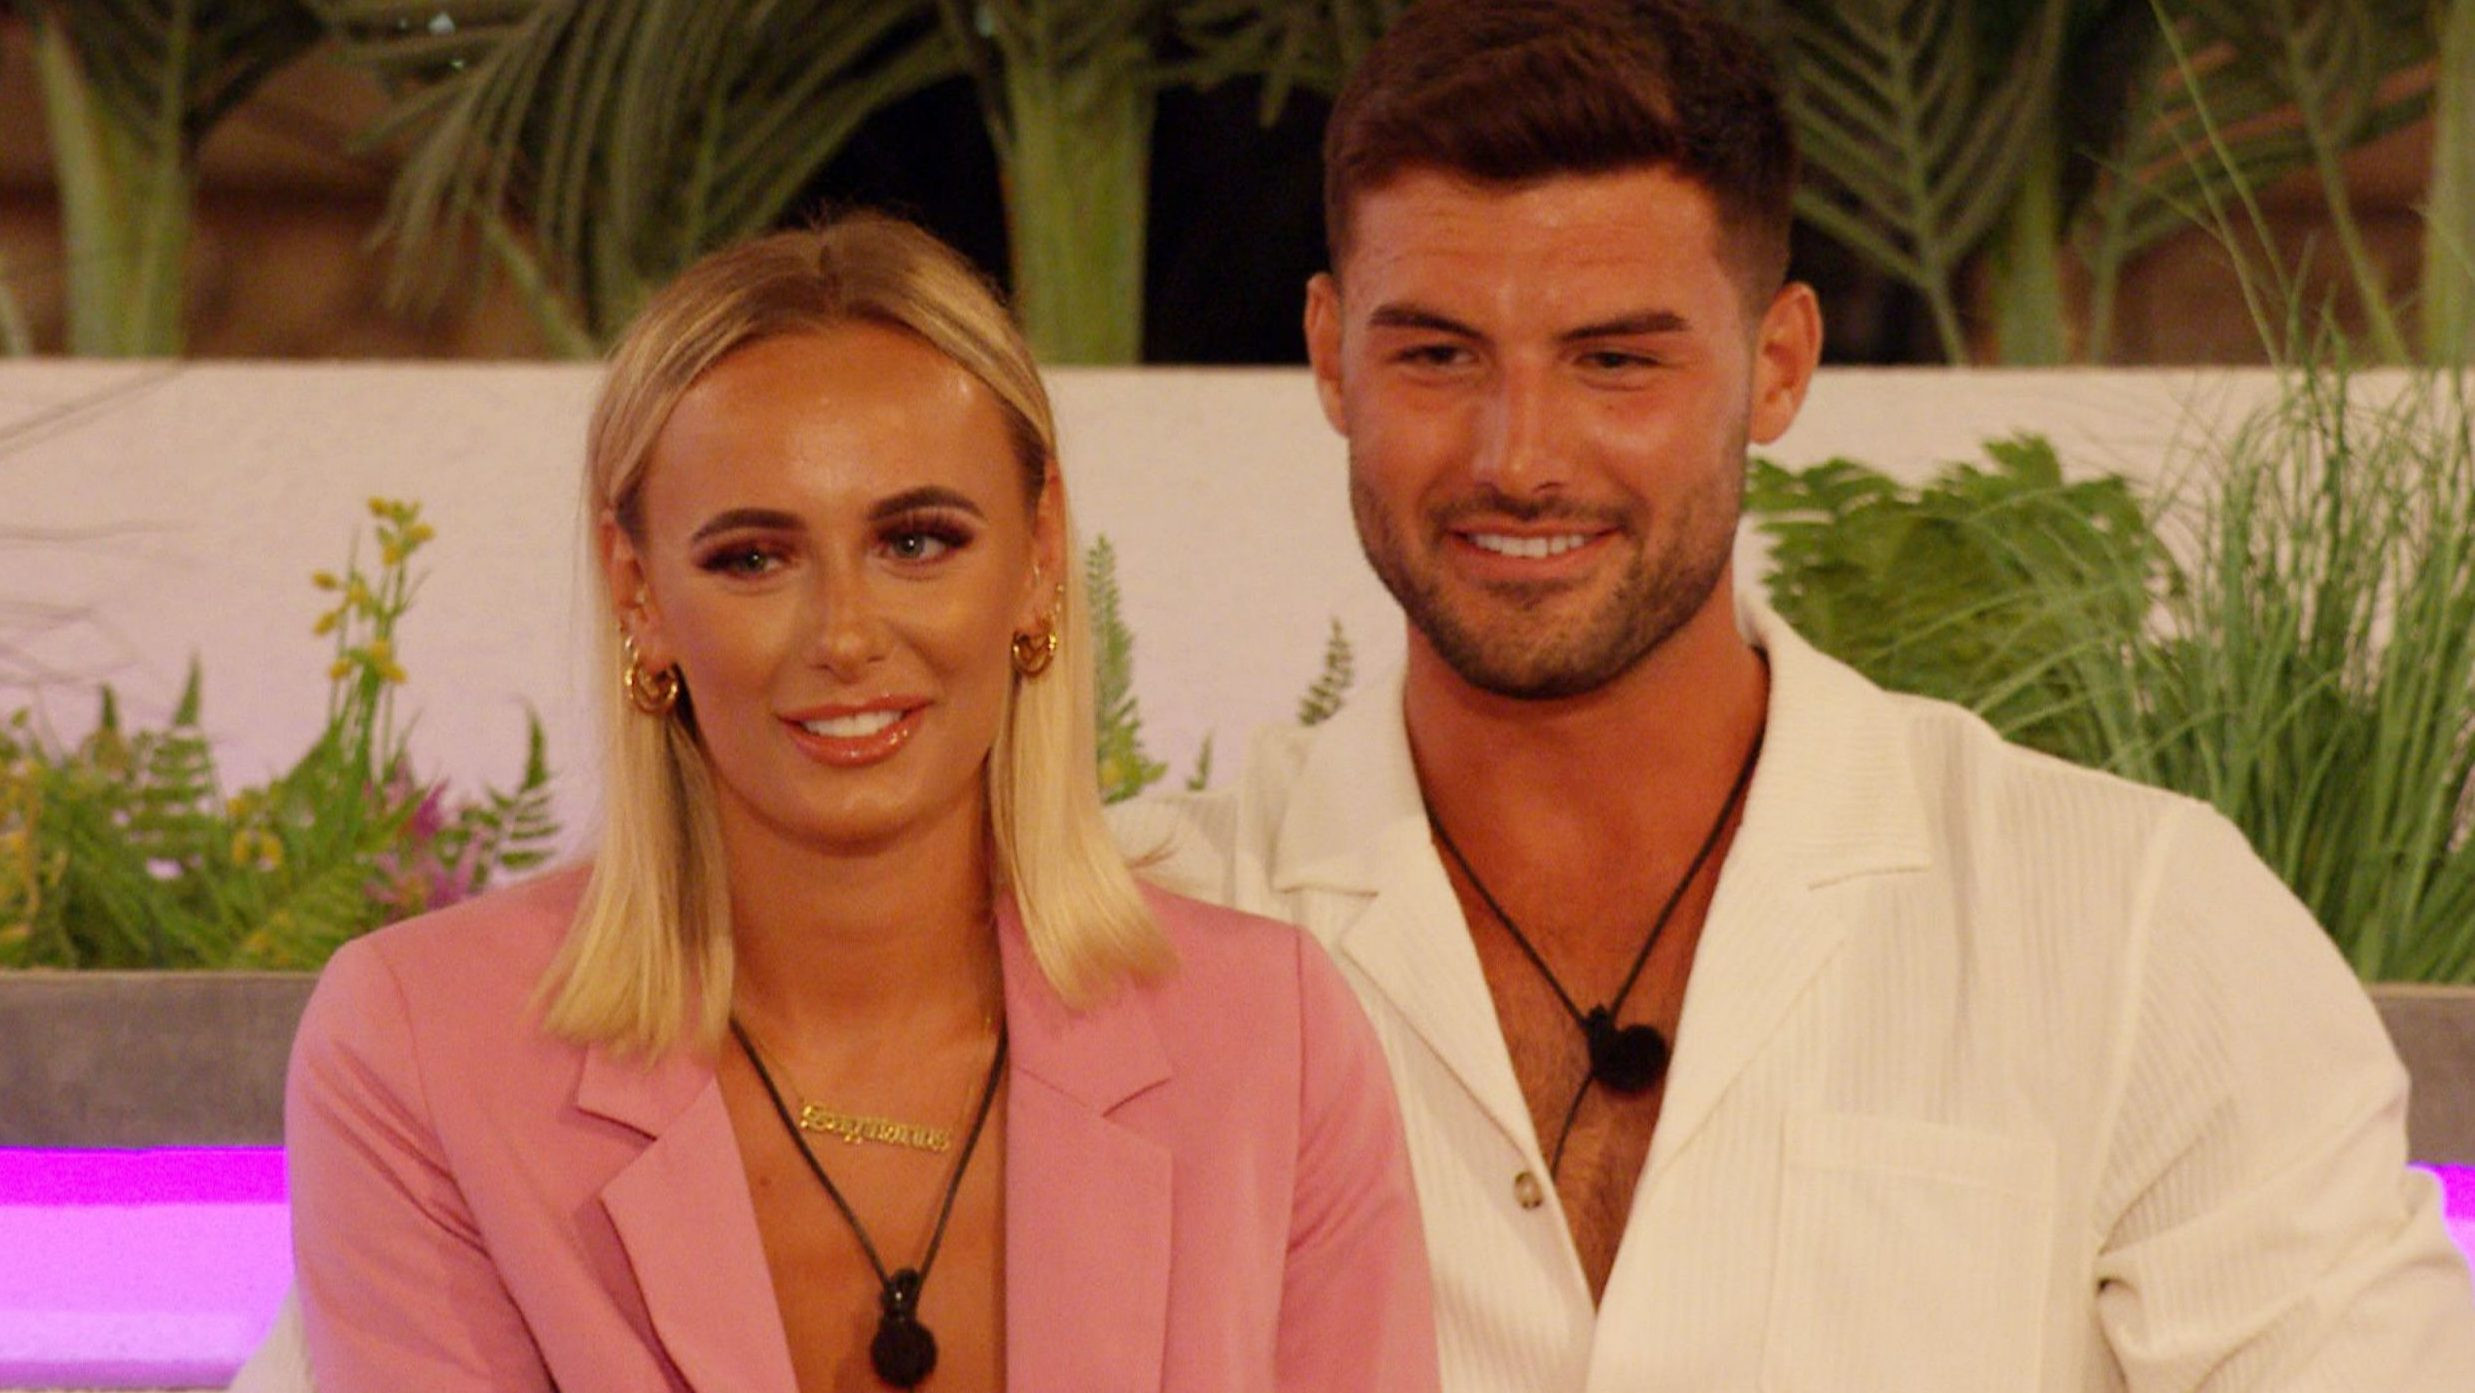 Love Island Liam on a Seriously Date Night With Irresistible Millie!